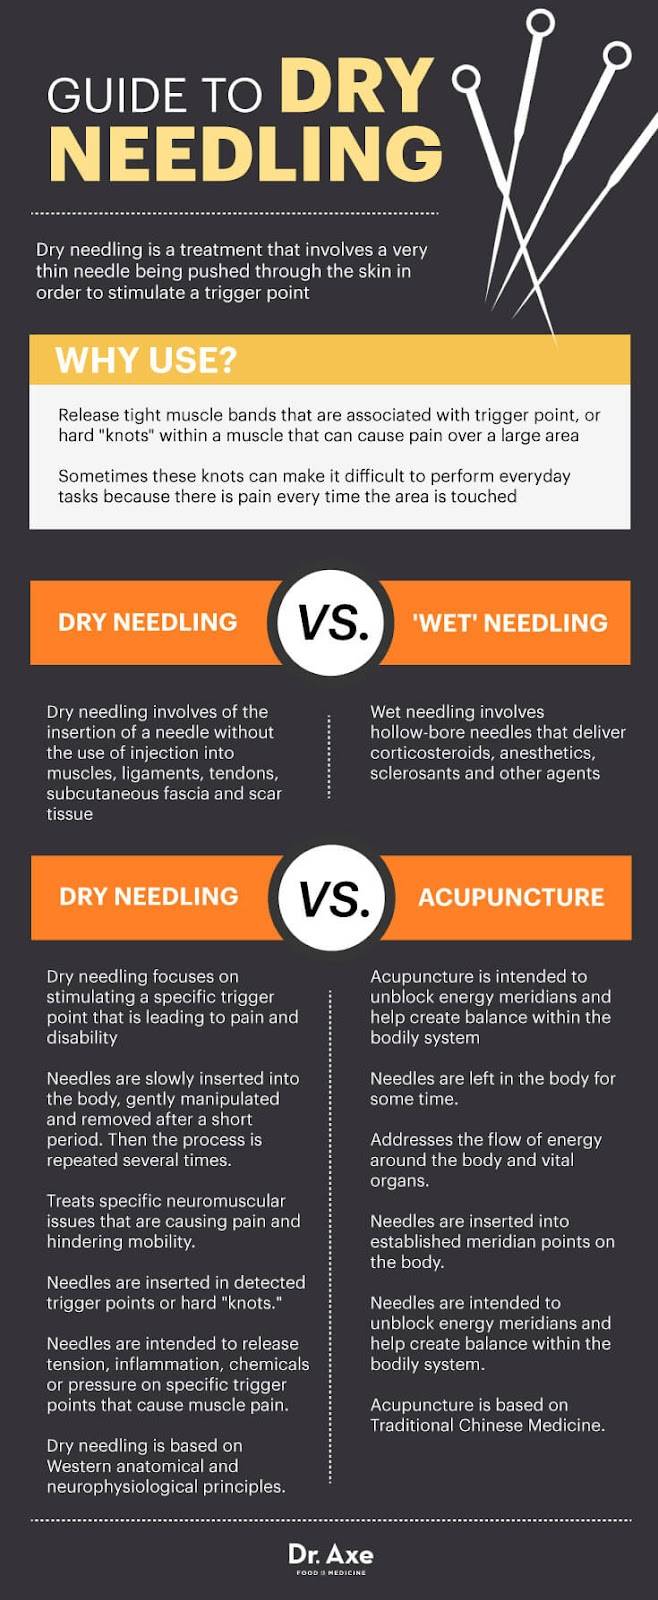 What is better than dry needling?